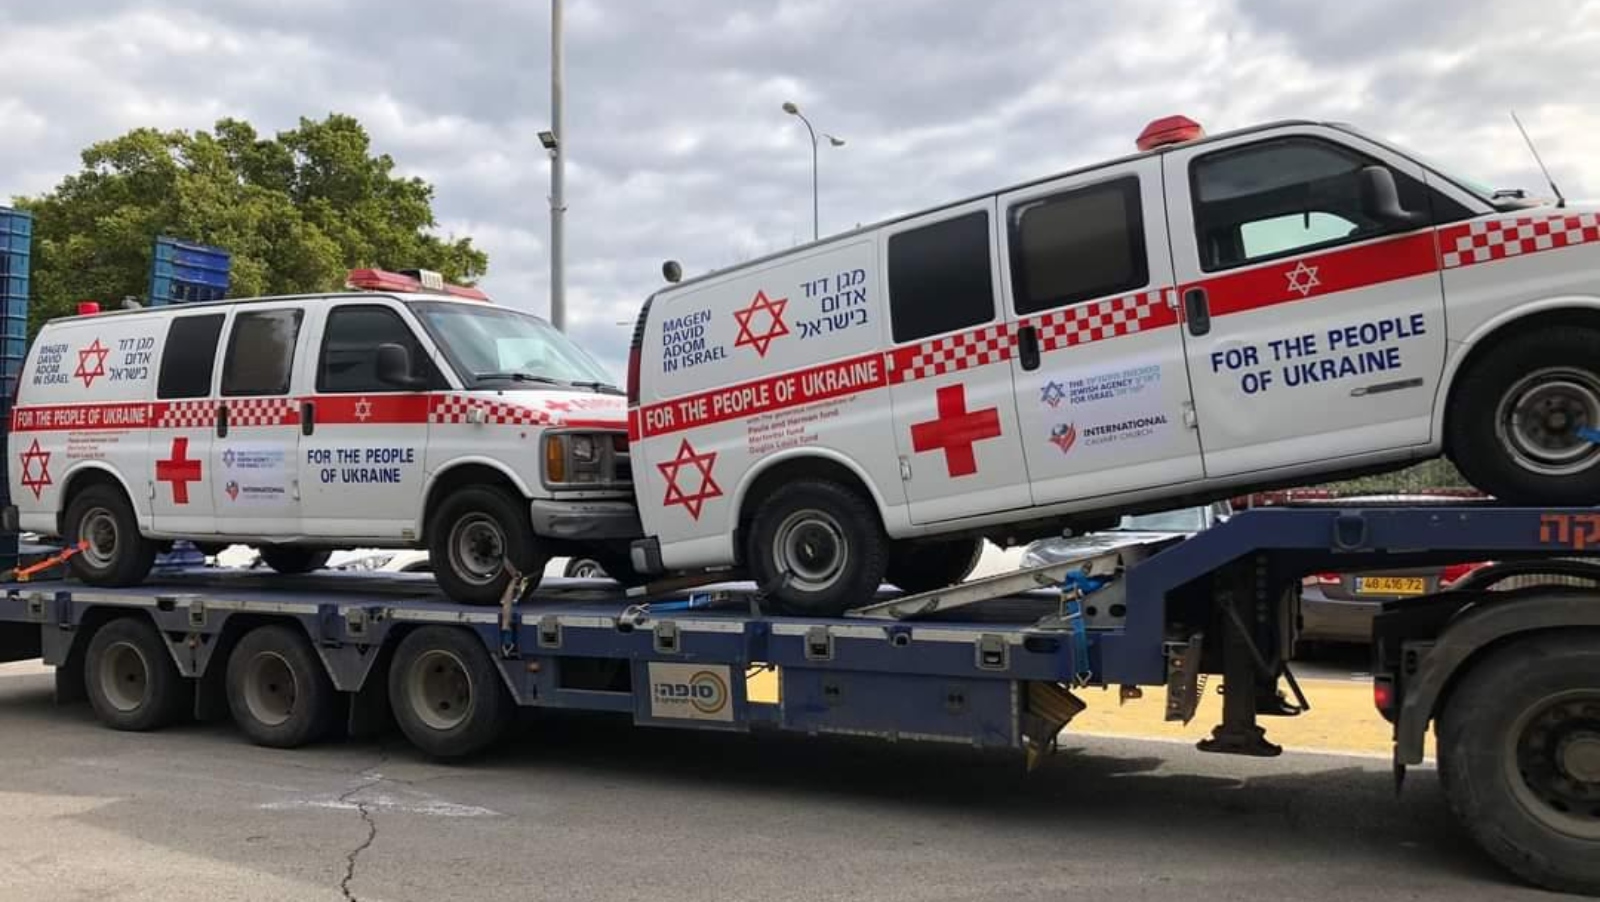 Magen David Adom armored ambulances make their way to Ukraine to help evacuate the wounded from the warzone. Photo courtesy of MDA